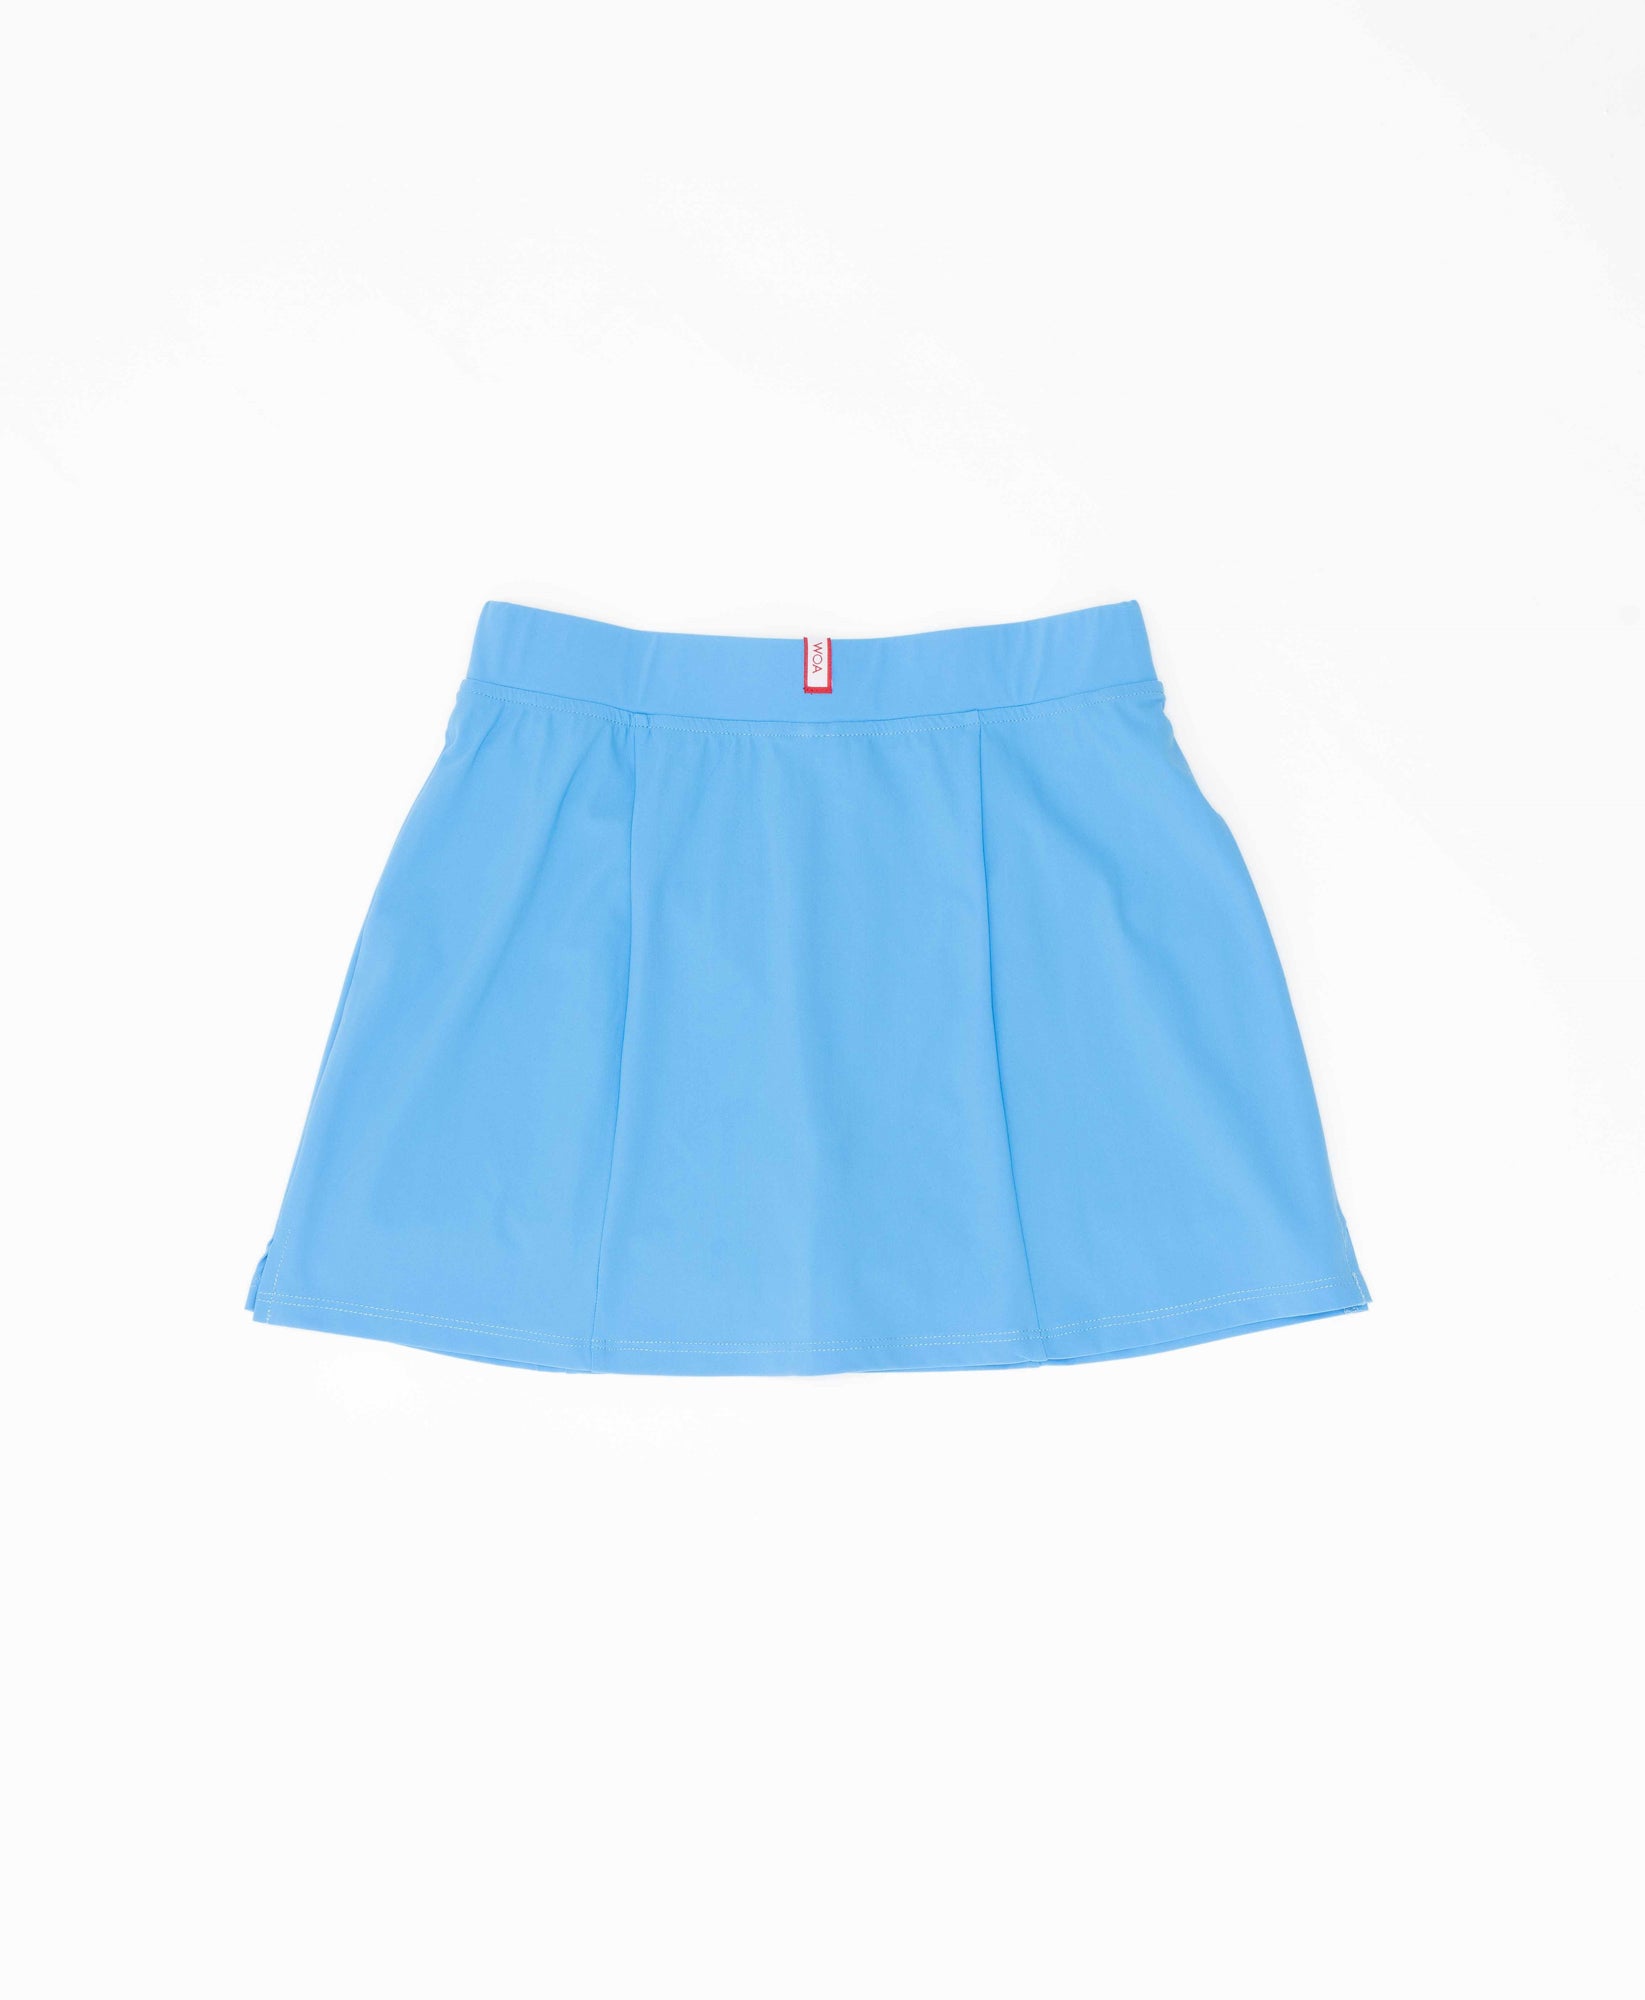 Wear One's At Simple Skort in Forget Me Not Blue on Model Leaning Against the Wall Front View